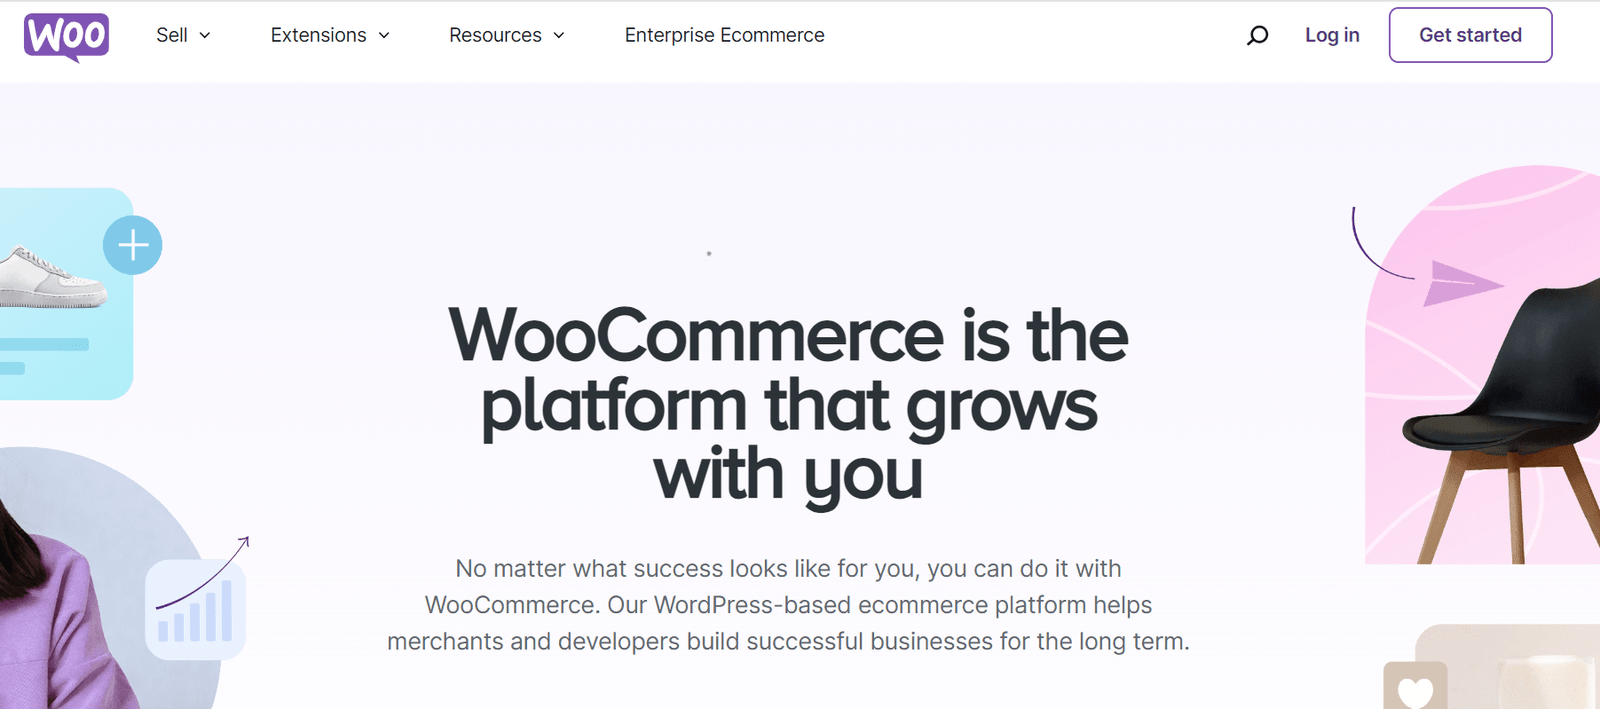 WooCommerce, Web Hosting for Dropshipping